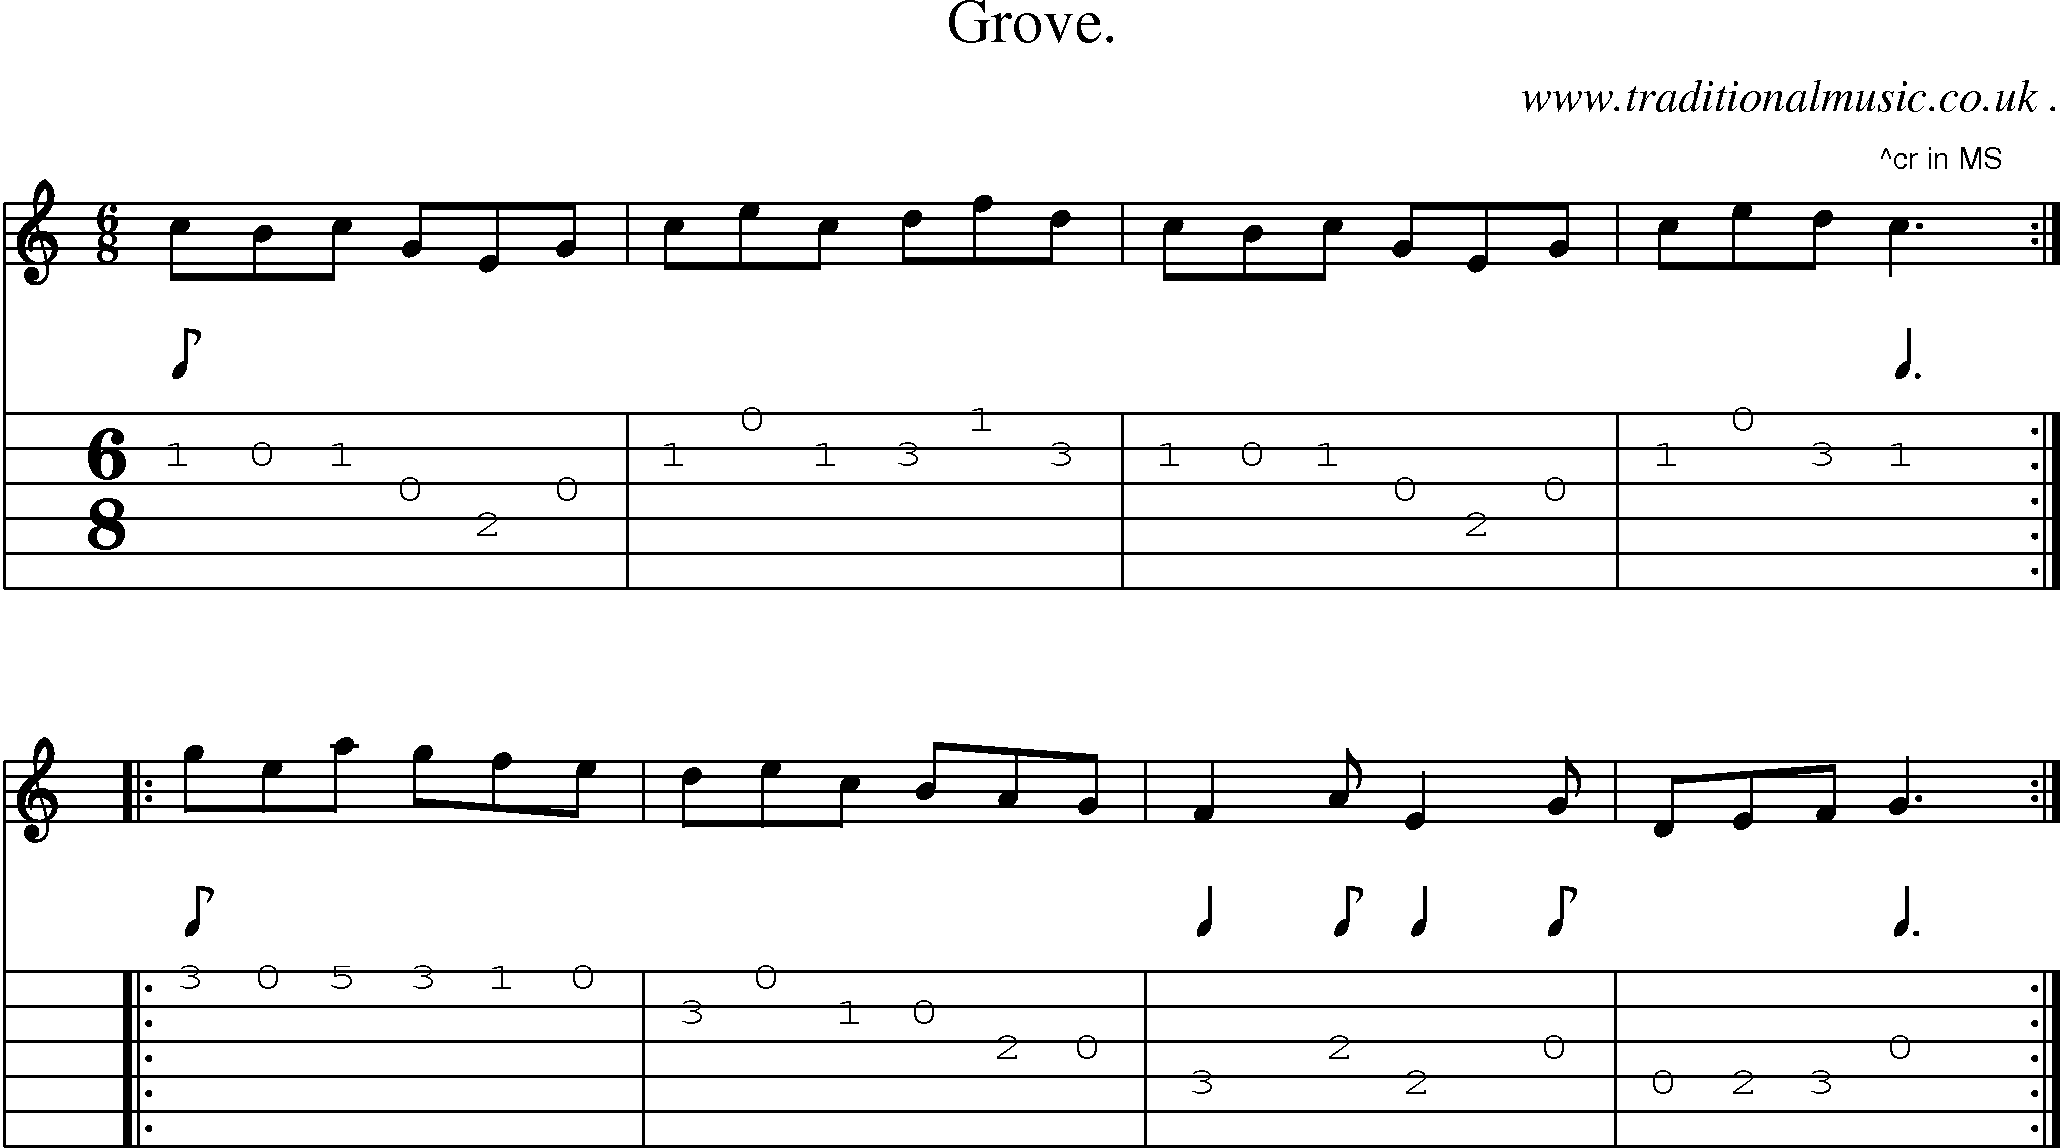 Sheet-Music and Guitar Tabs for Grove